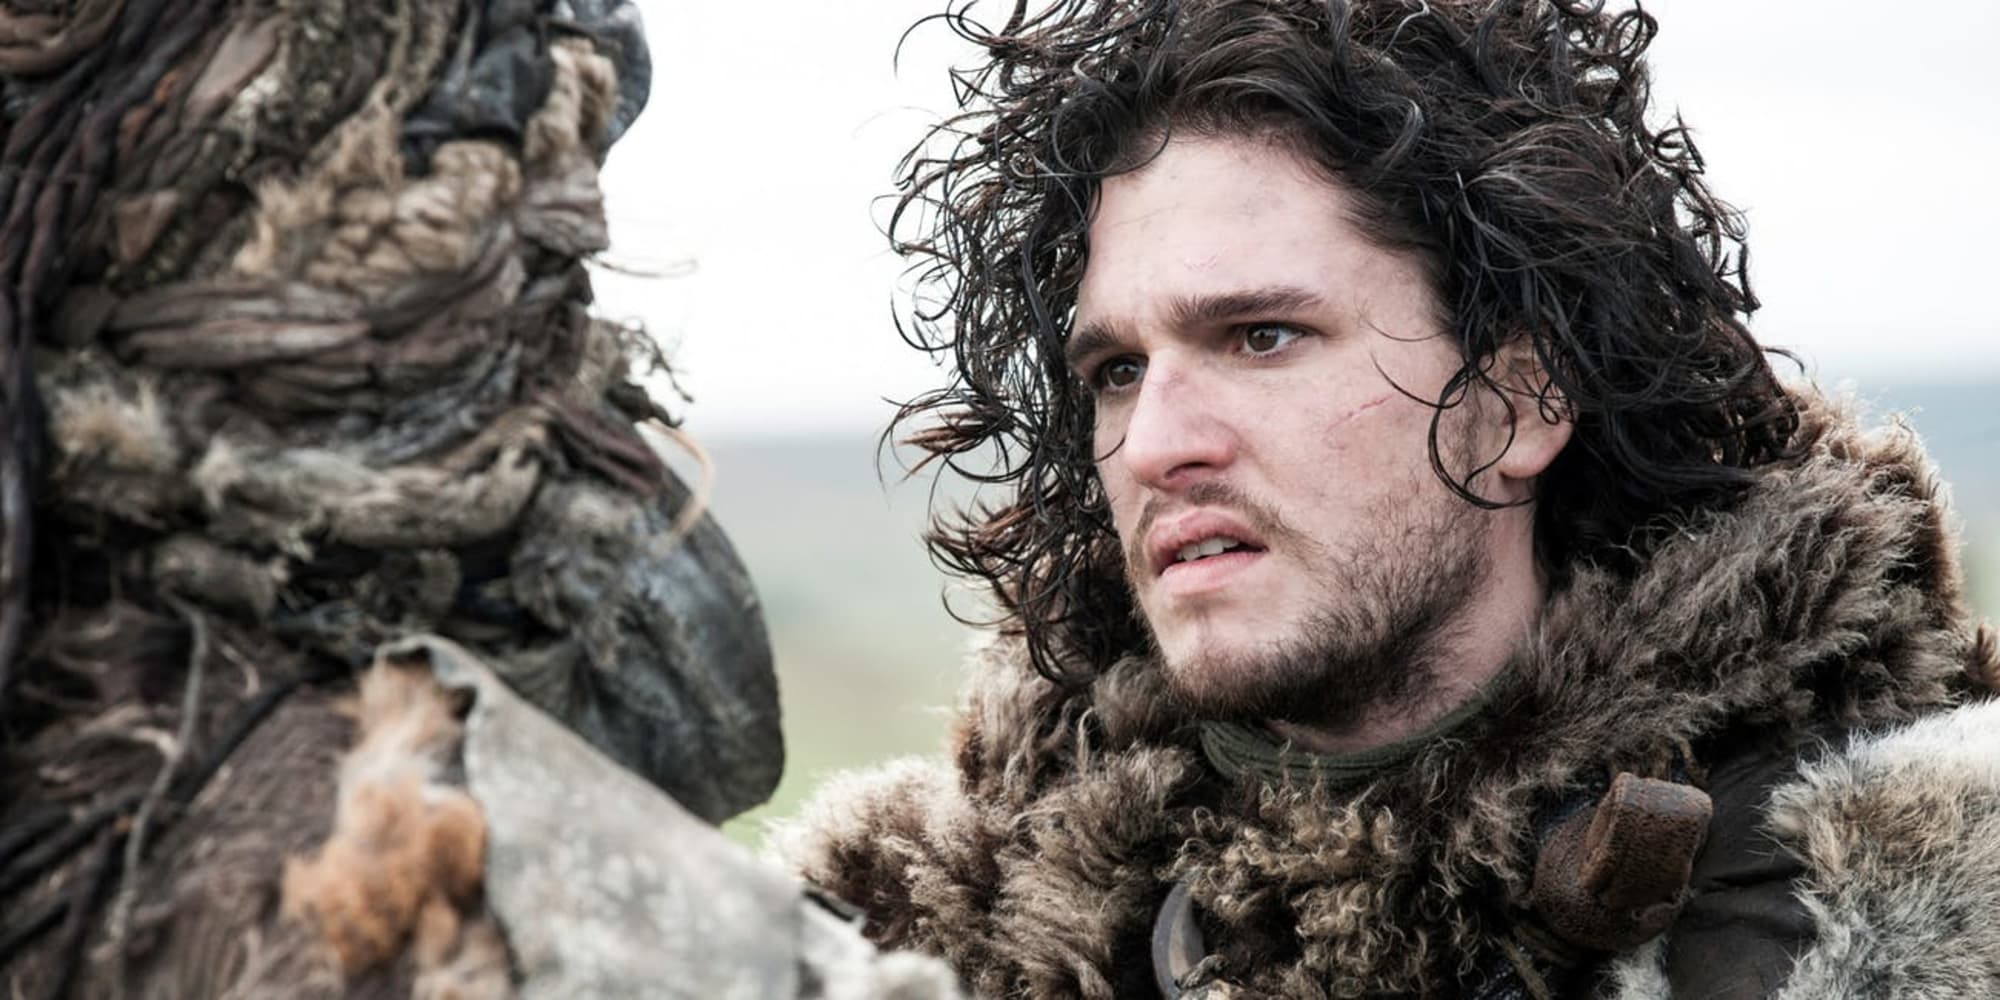 HBO doesn’t know if it will greenlight the Jon Snow sequel show